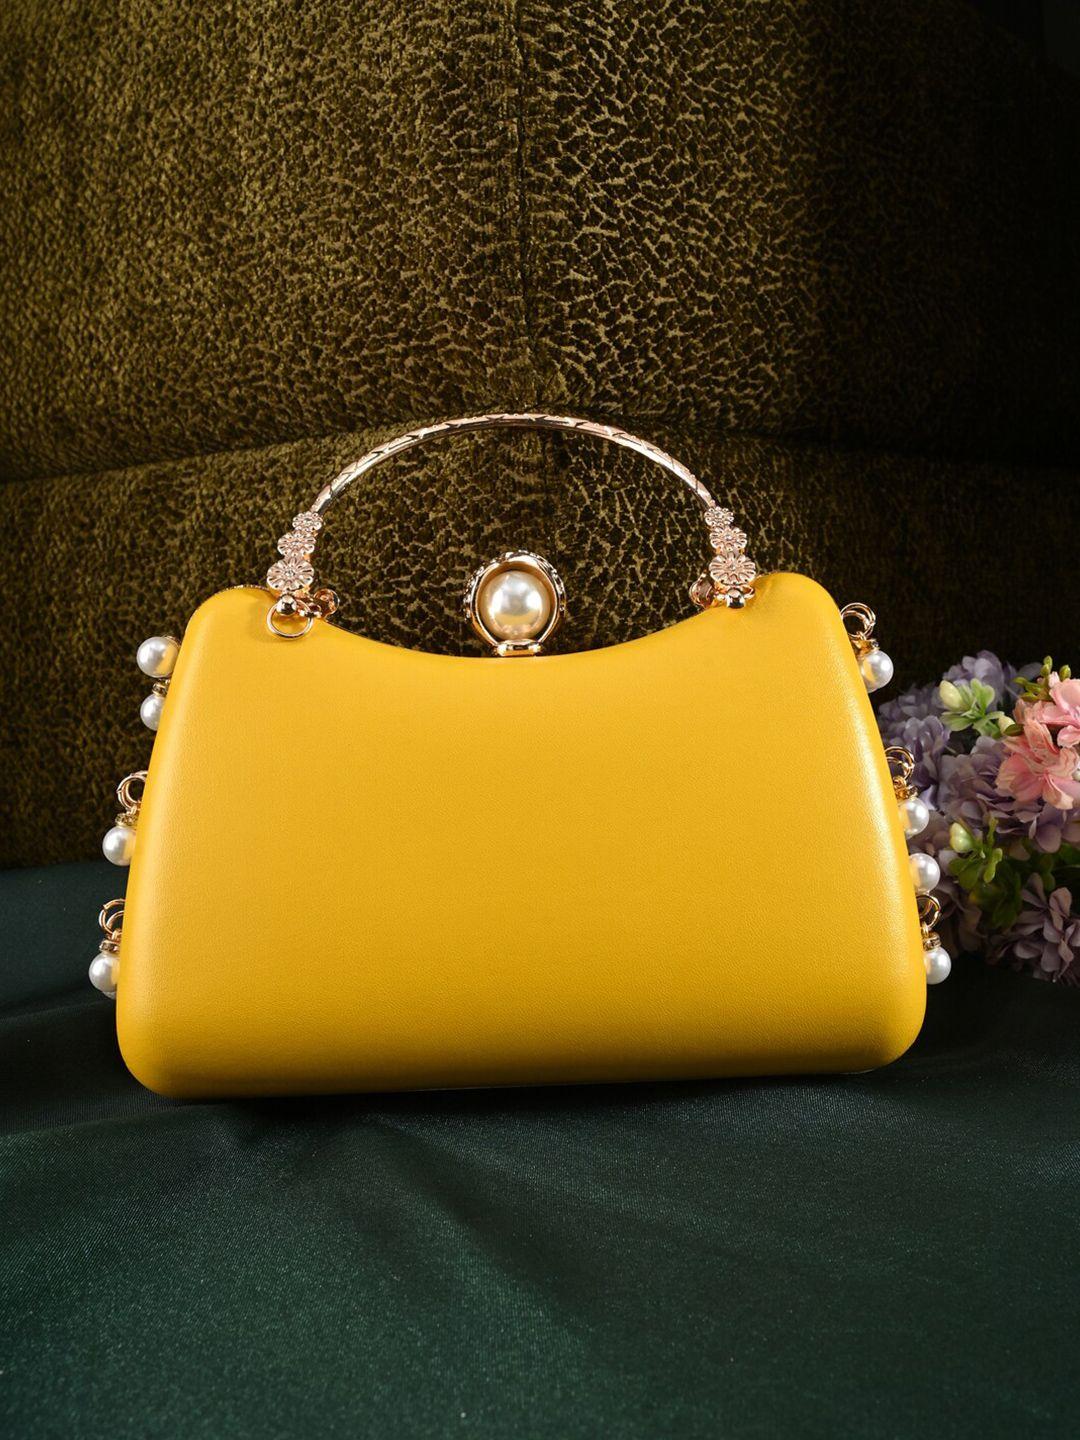 toobacraft yellow & gold-toned embellished box clutch